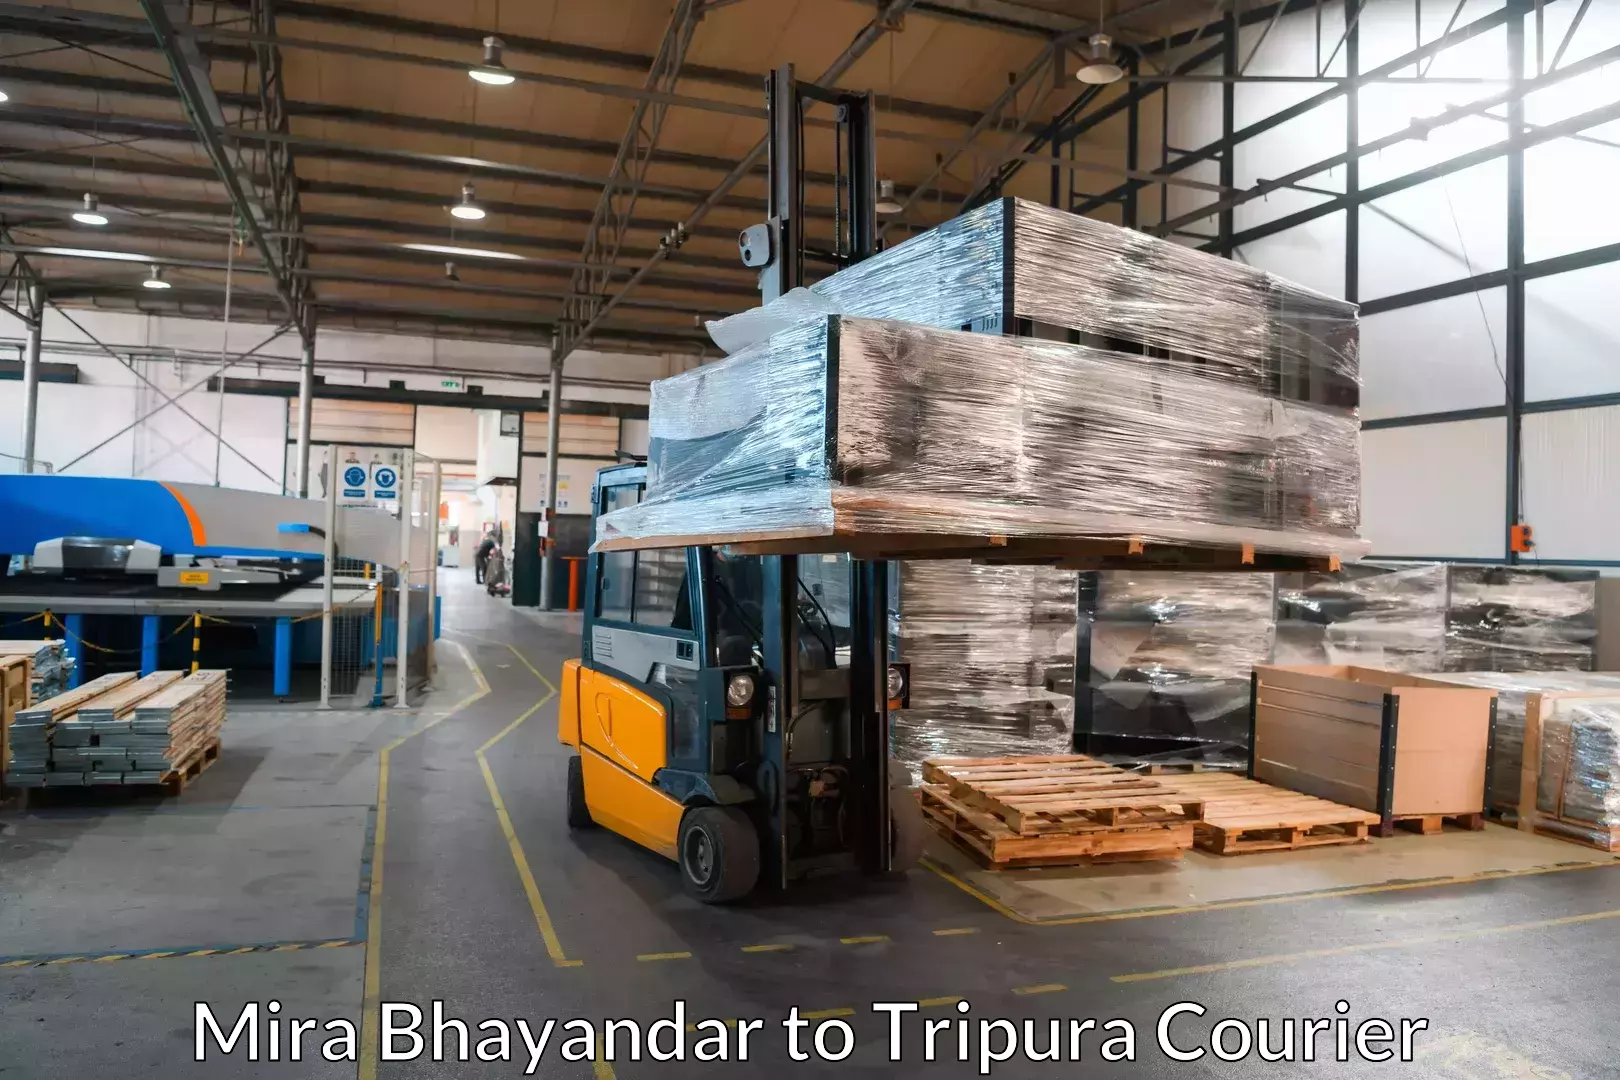 Furniture delivery service Mira Bhayandar to Kailashahar